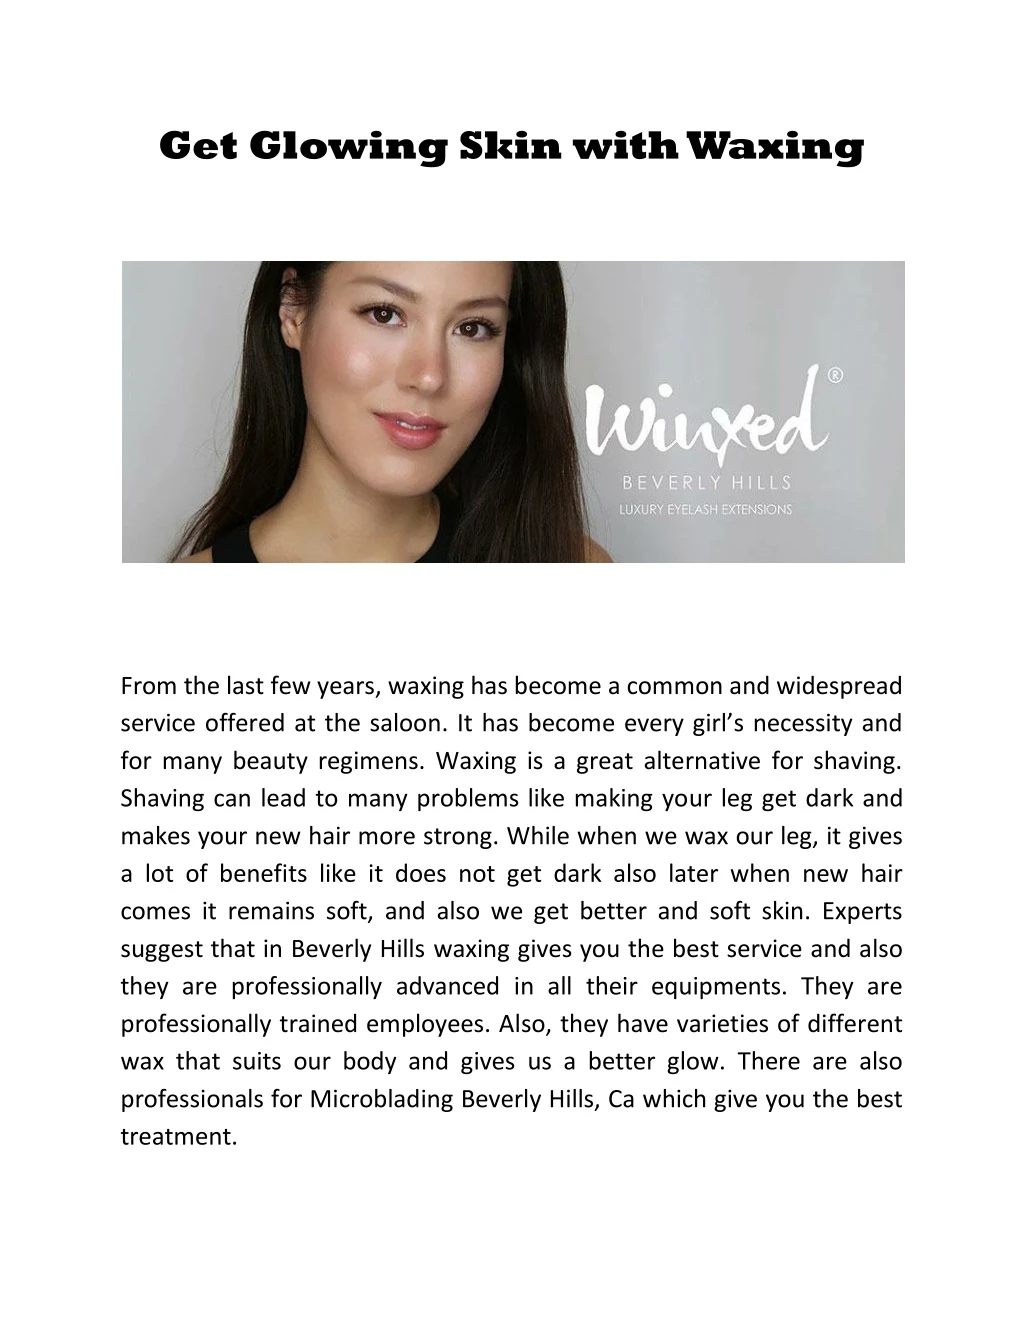 get glowing skin with waxing